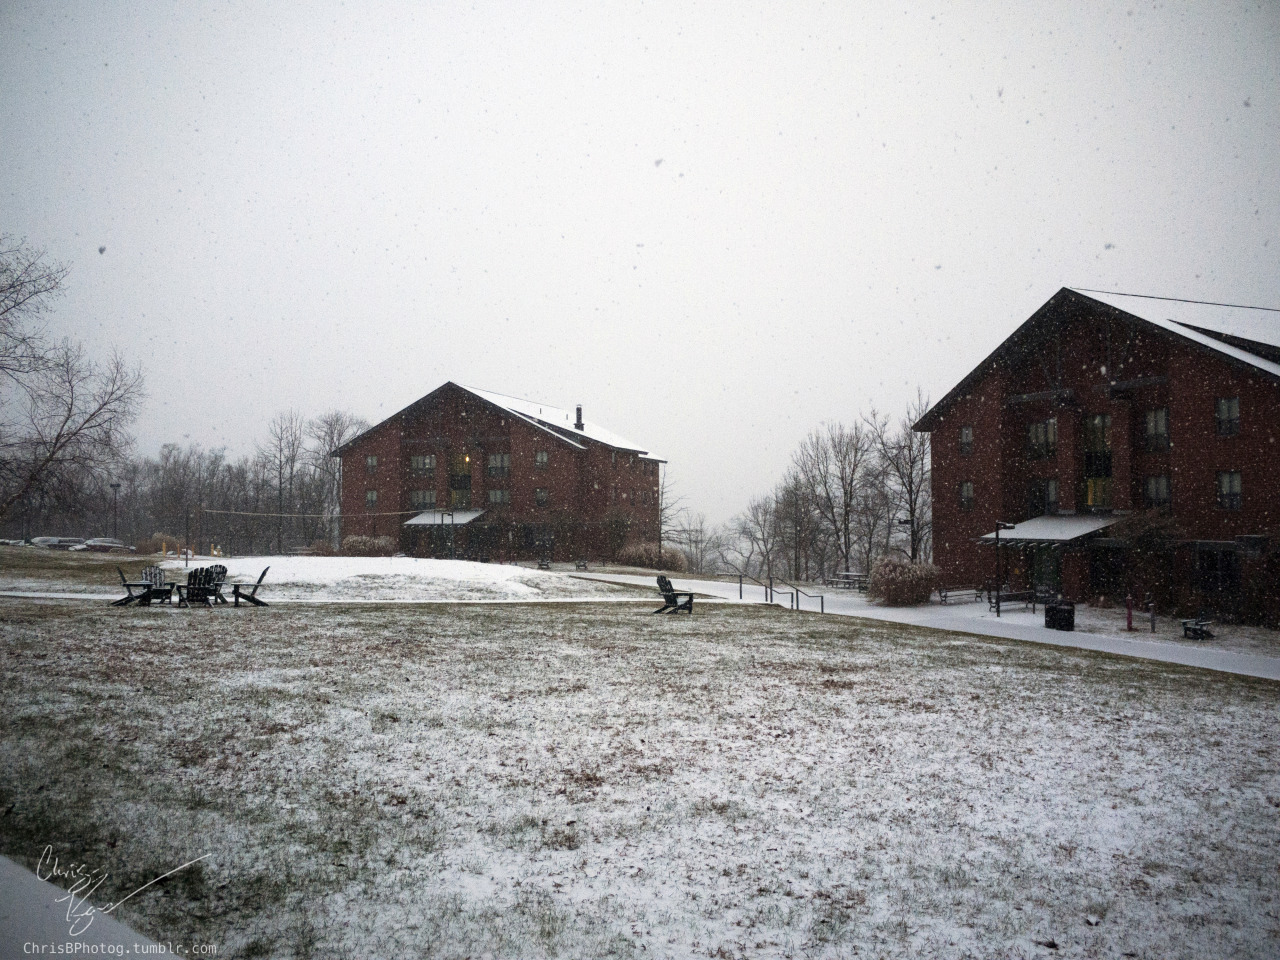 And one more of Sayre. That&rsquo;s all for snow, but I&rsquo;m going to post a few from the concert a few weeks ago for this blog